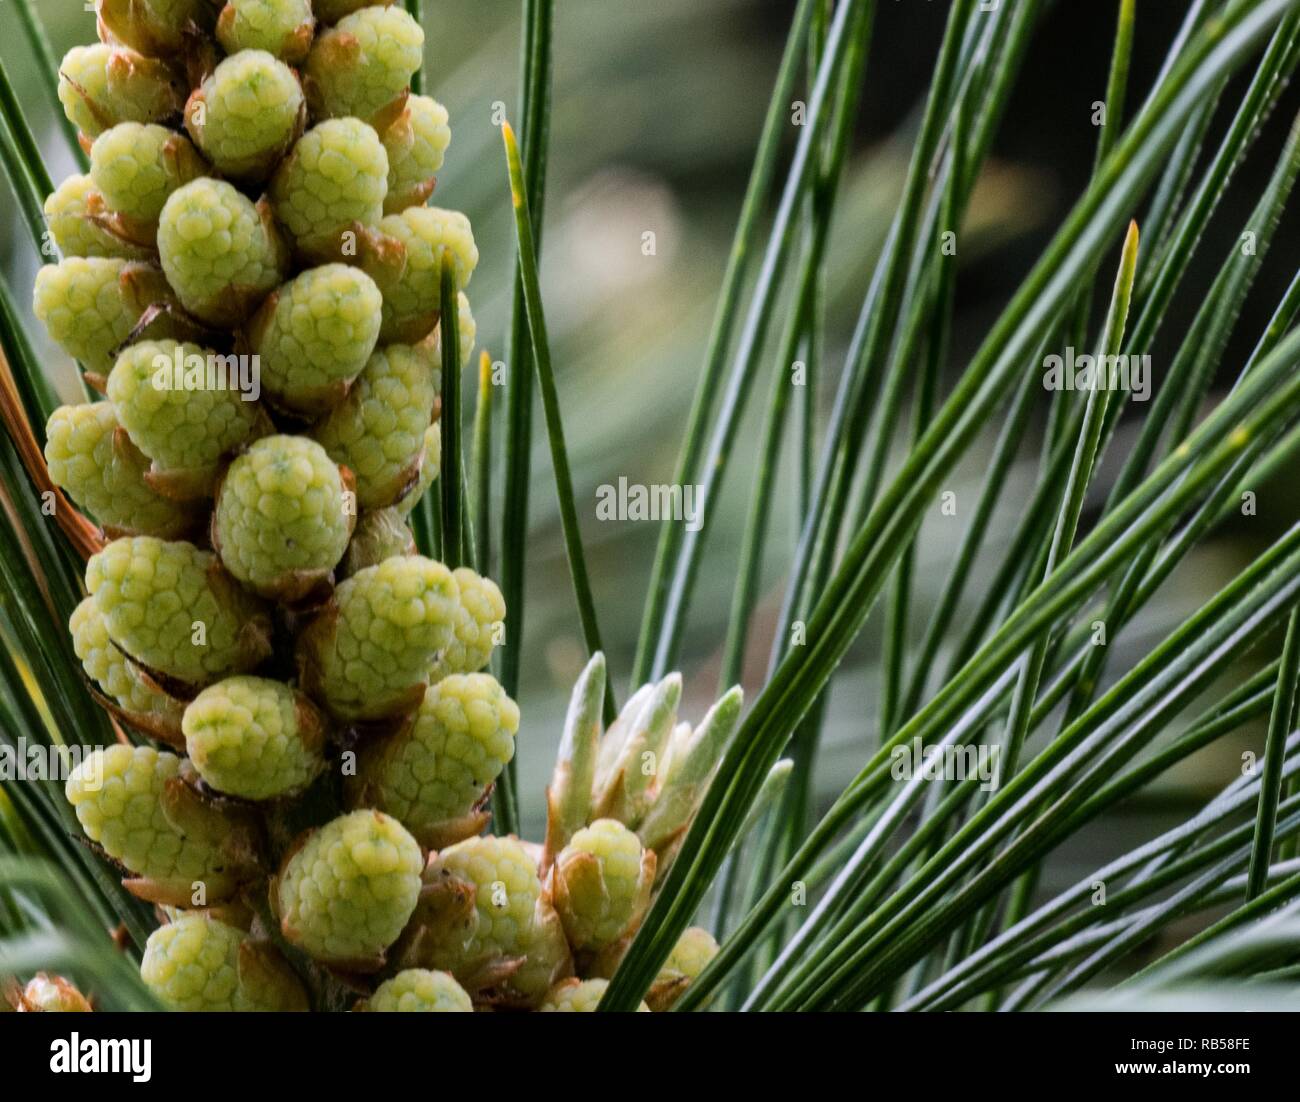 Pine tree photography - Outdoor nature photography - Scenic images - abstract background images - images for desktop background Foto Stock